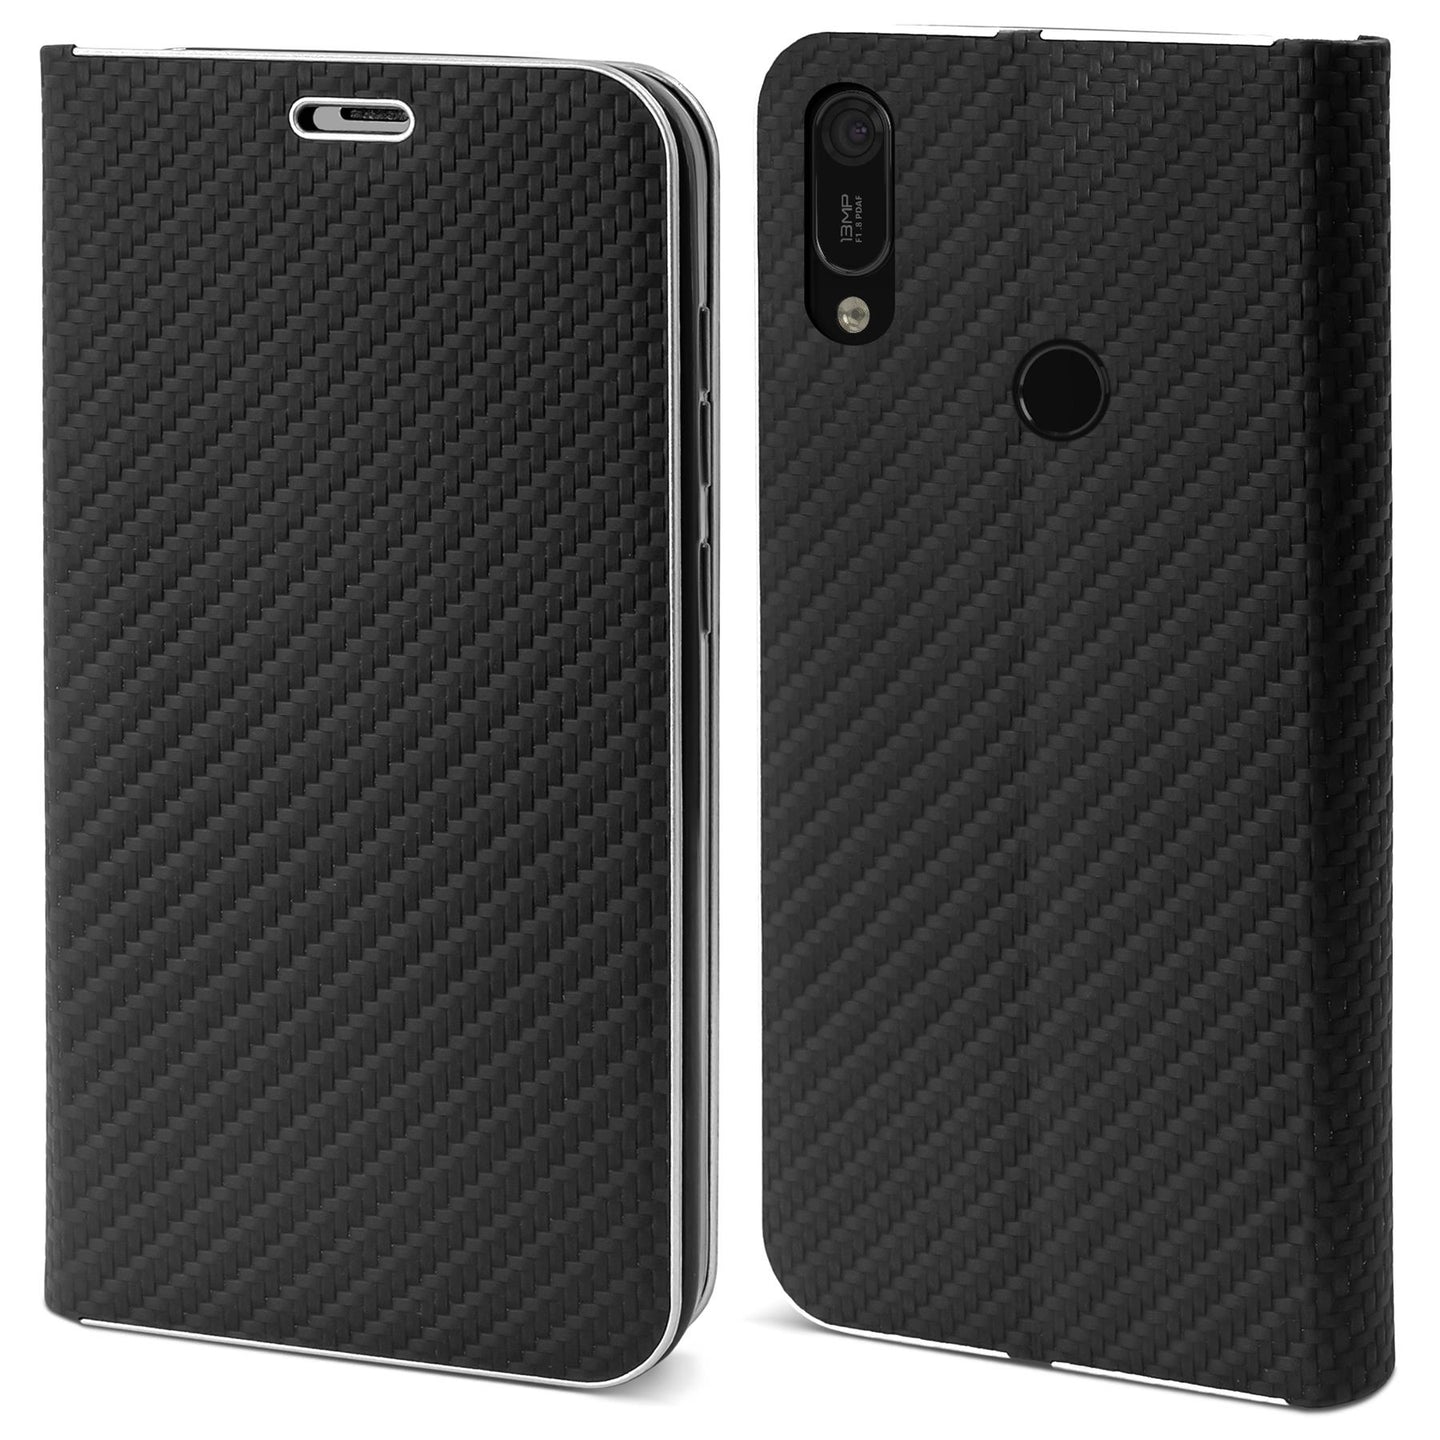 Moozy Wallet Case for Huawei Y6 2019, Black Carbon – Metallic Edge Protection Magnetic Closure Flip Cover with Card Holder